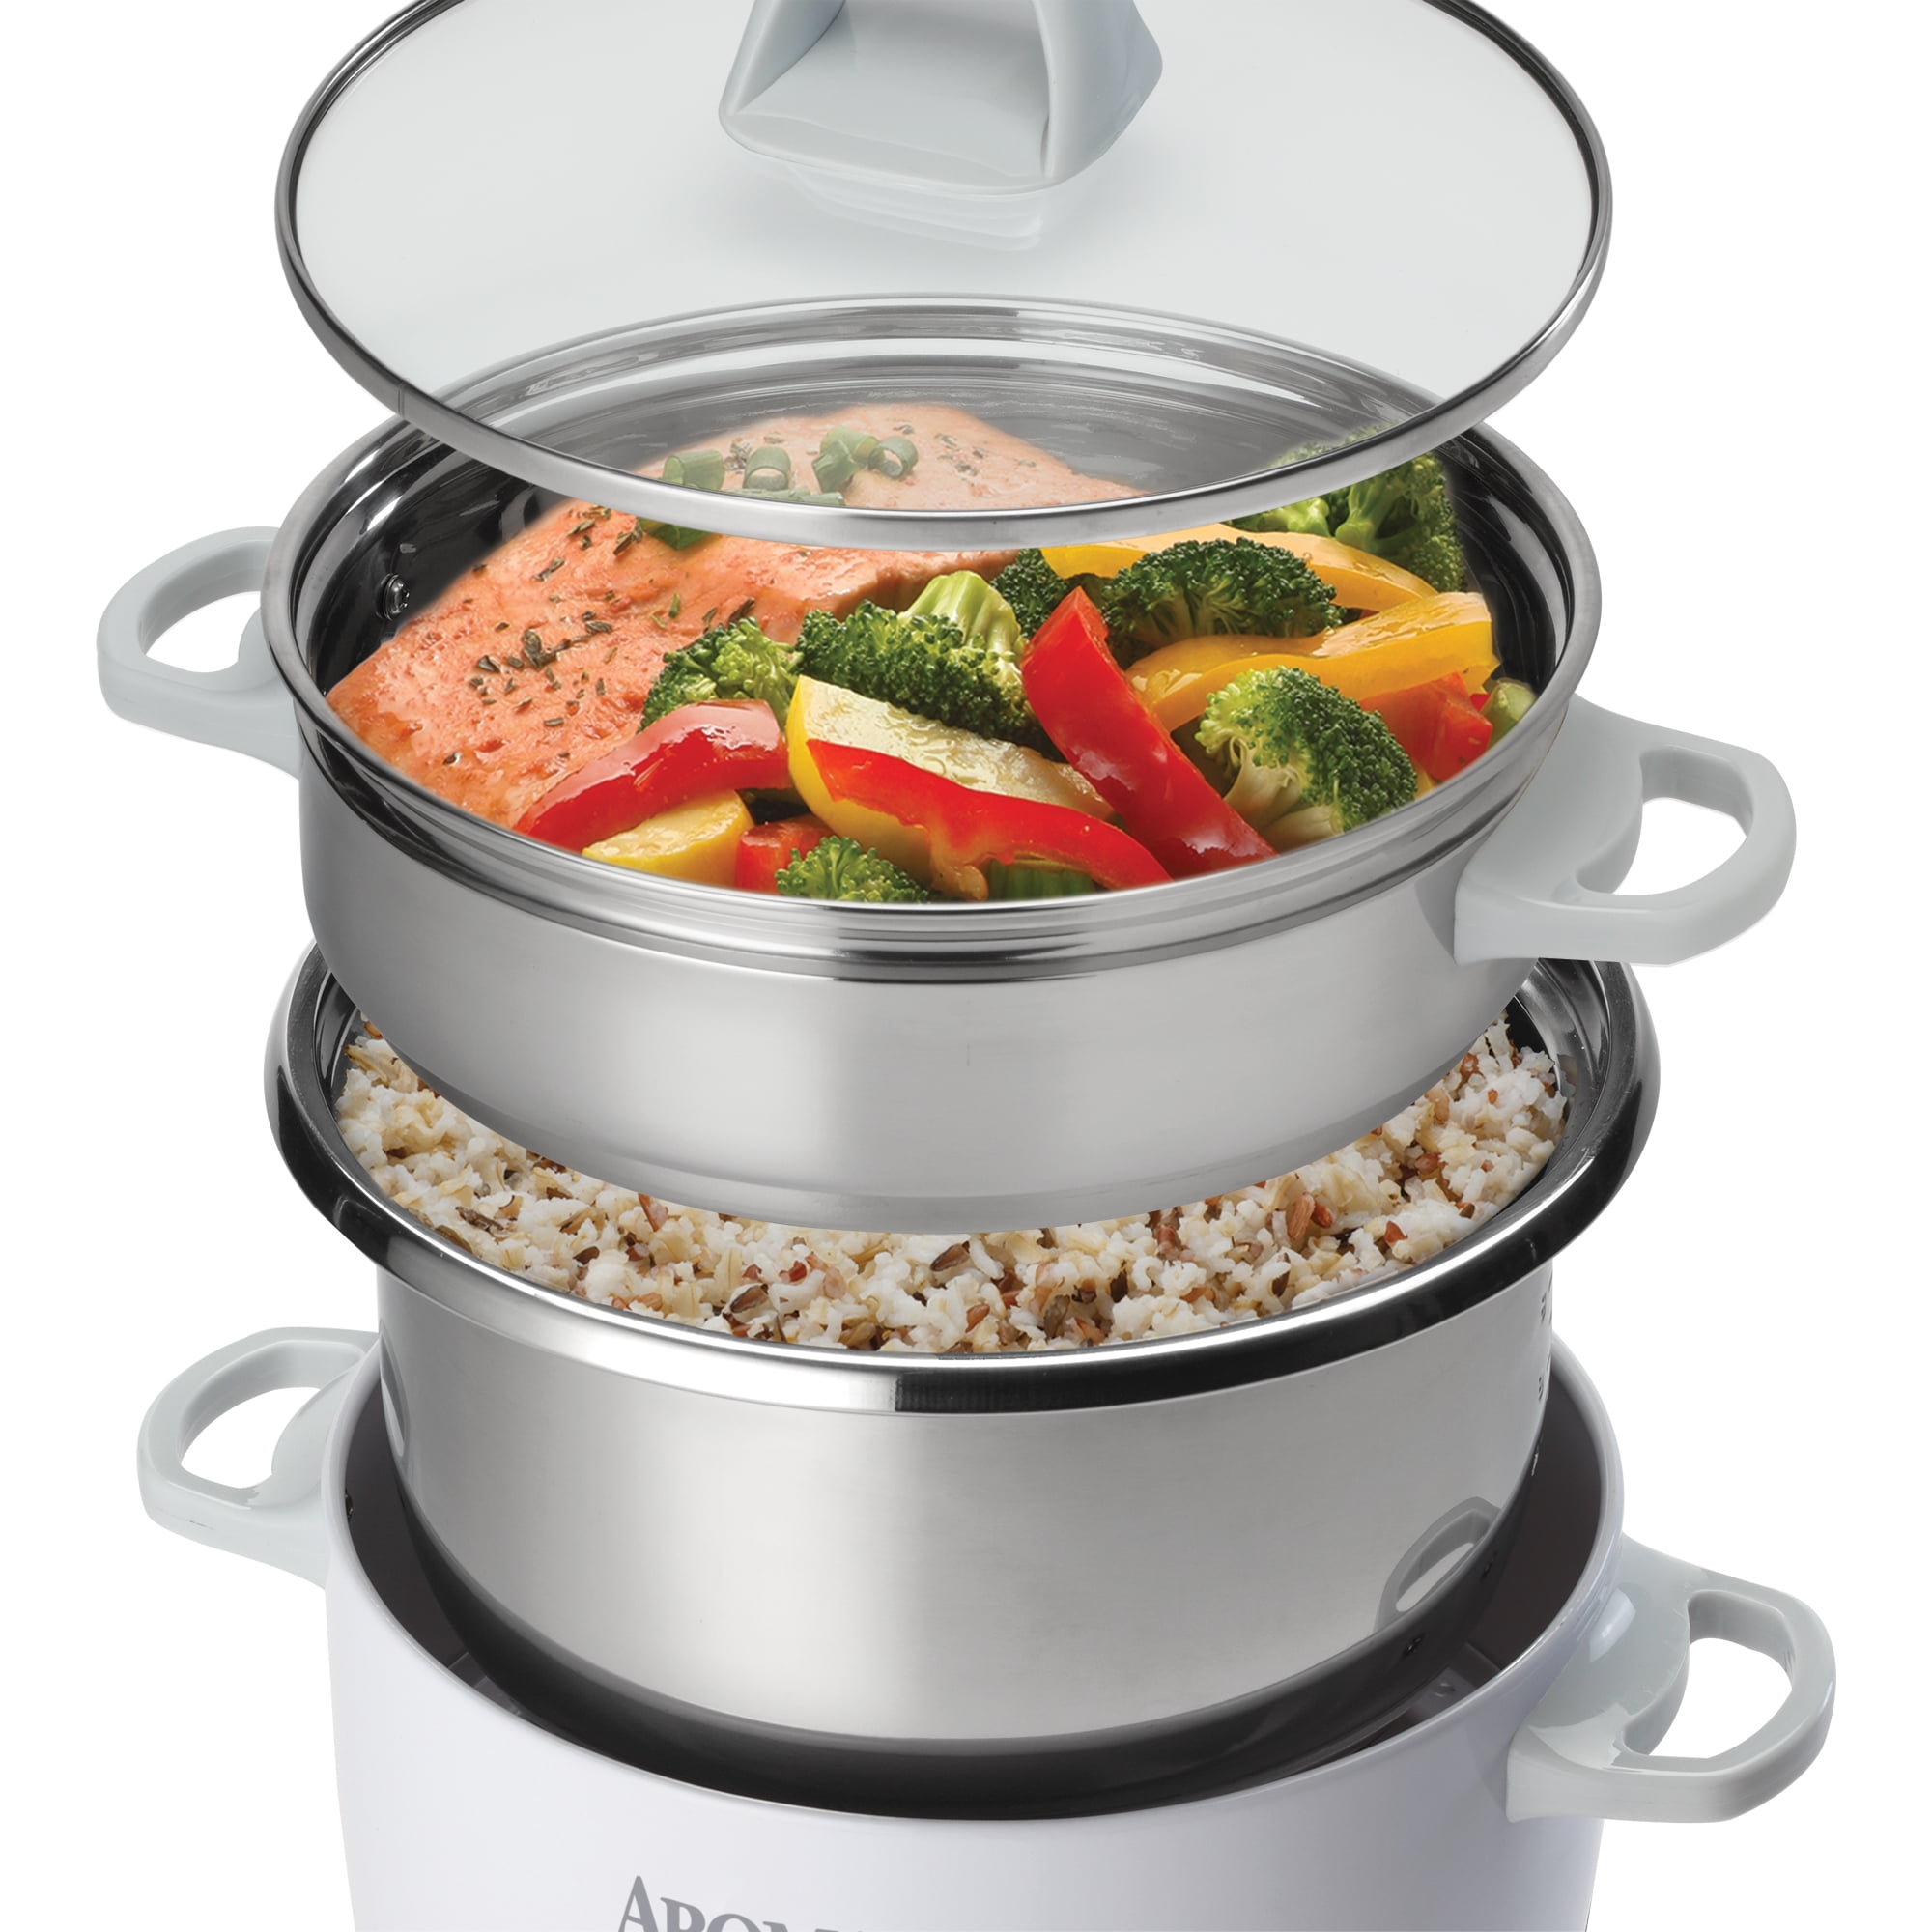 Aroma ARC-753SG Simply Stainless 6-Cup Rice Cooker - Bed Bath & Beyond -  18827723